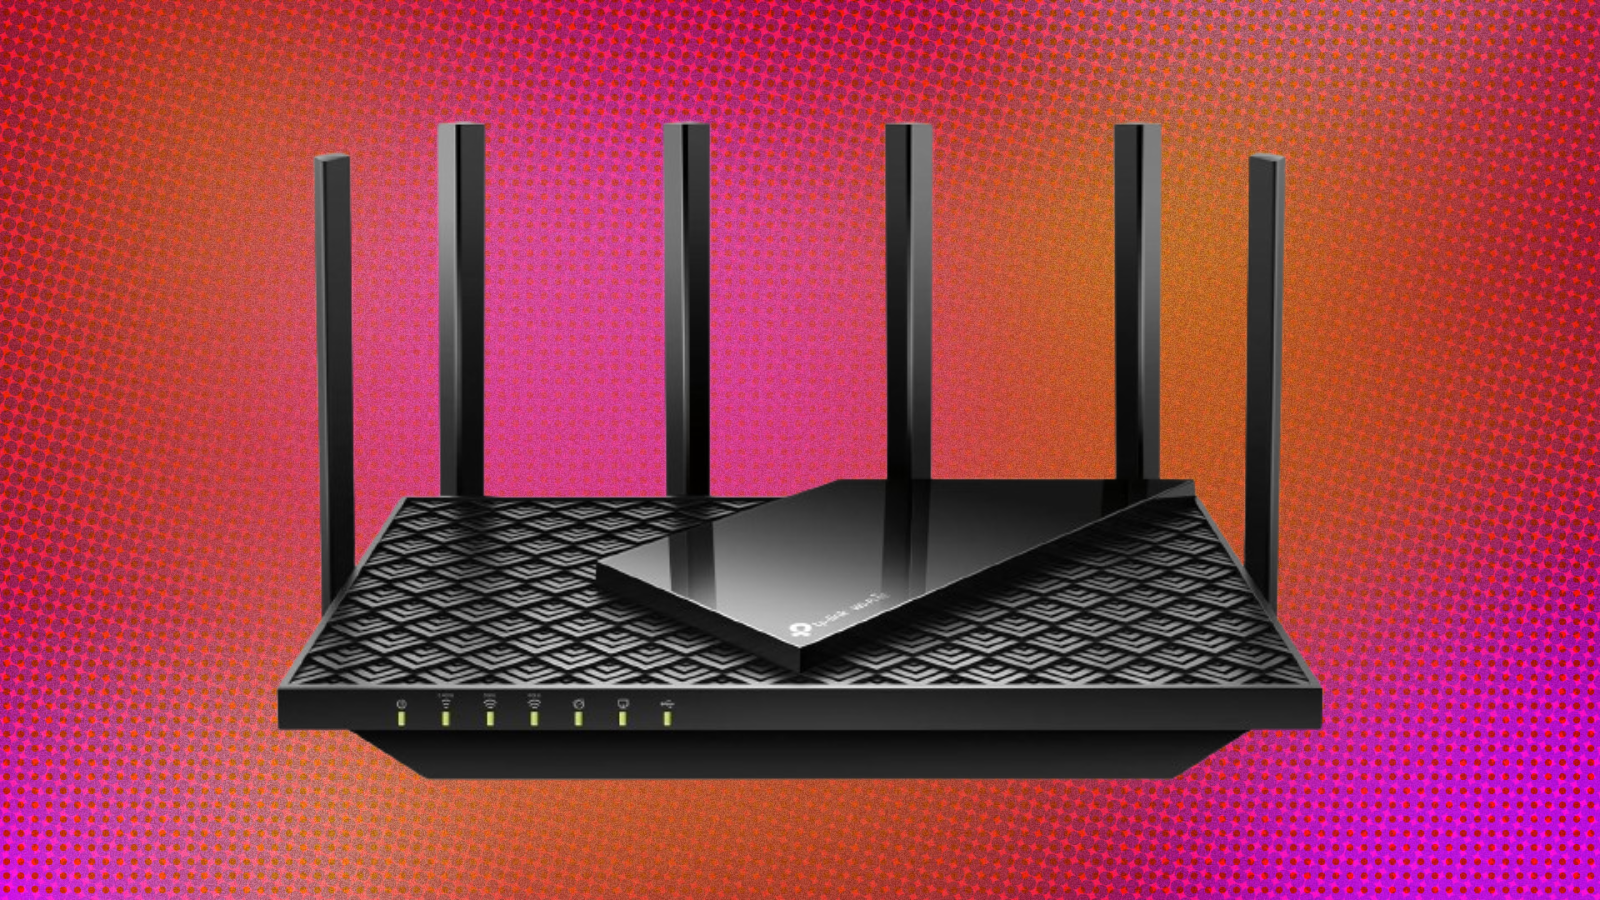 the TP-Link Archer AXE75 router against a pink and orange abstract background